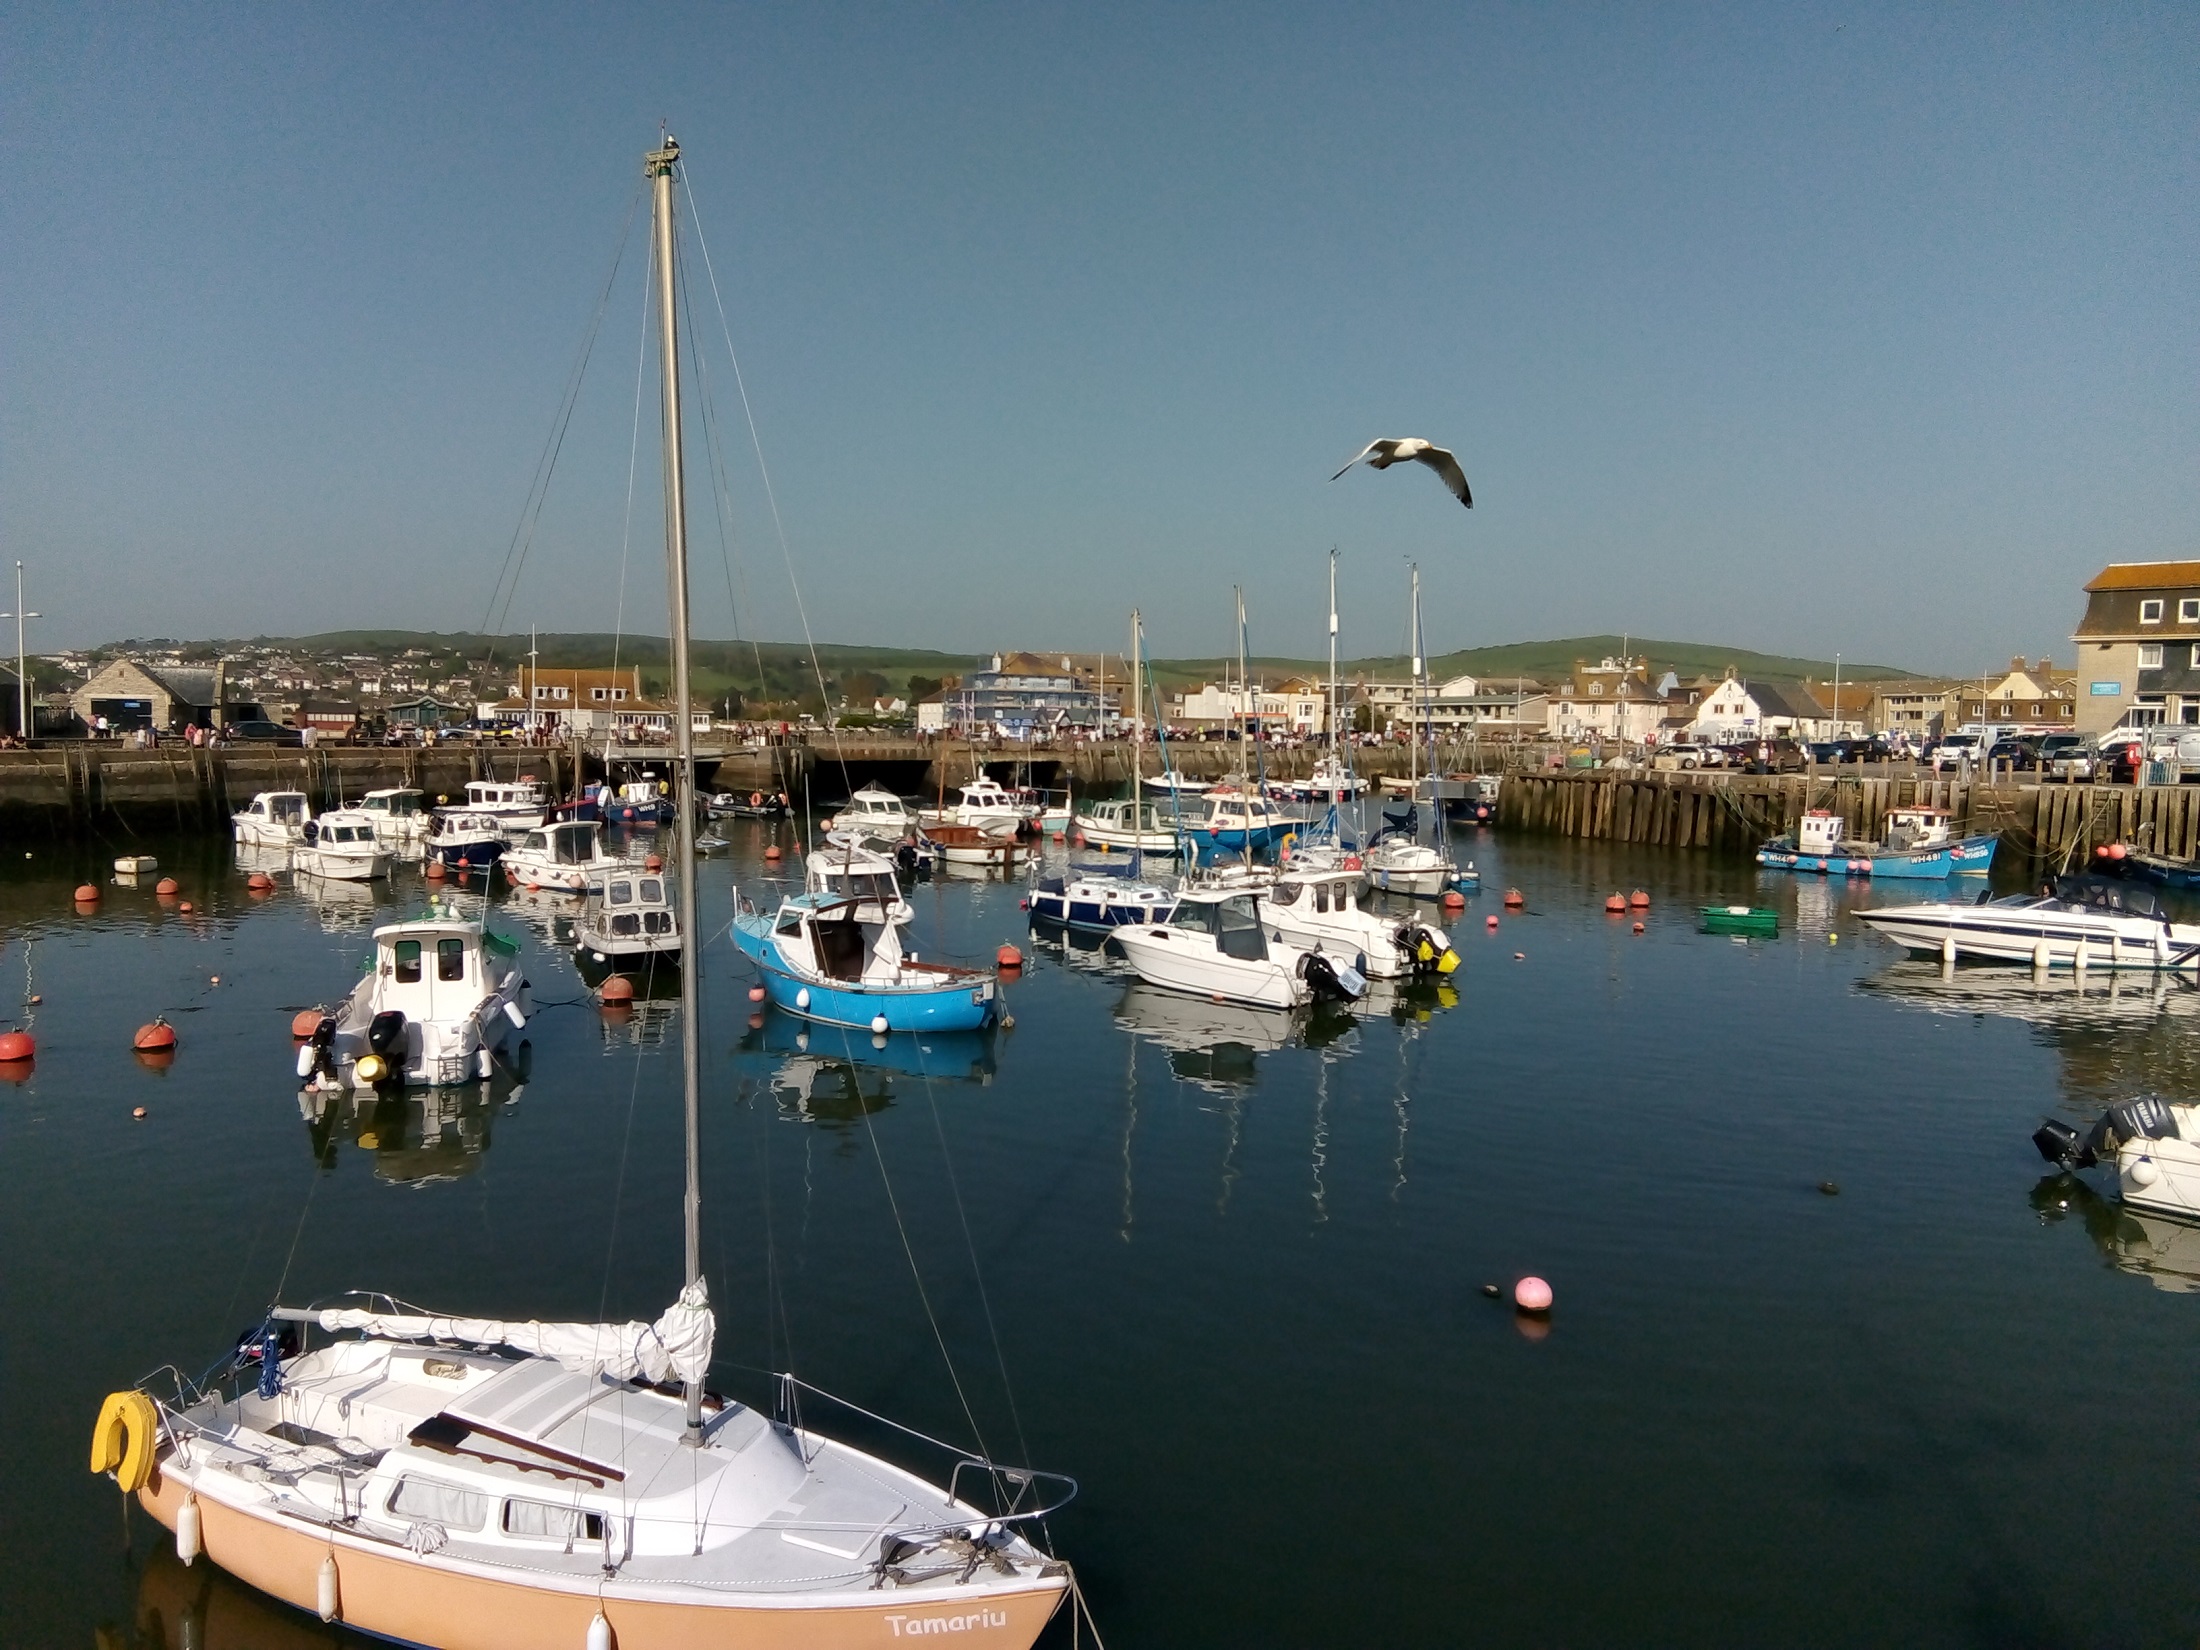 A harbour viewed under a blue sky with boats moored up, with a seagull flying over the scene. In the distance green hills are visible.